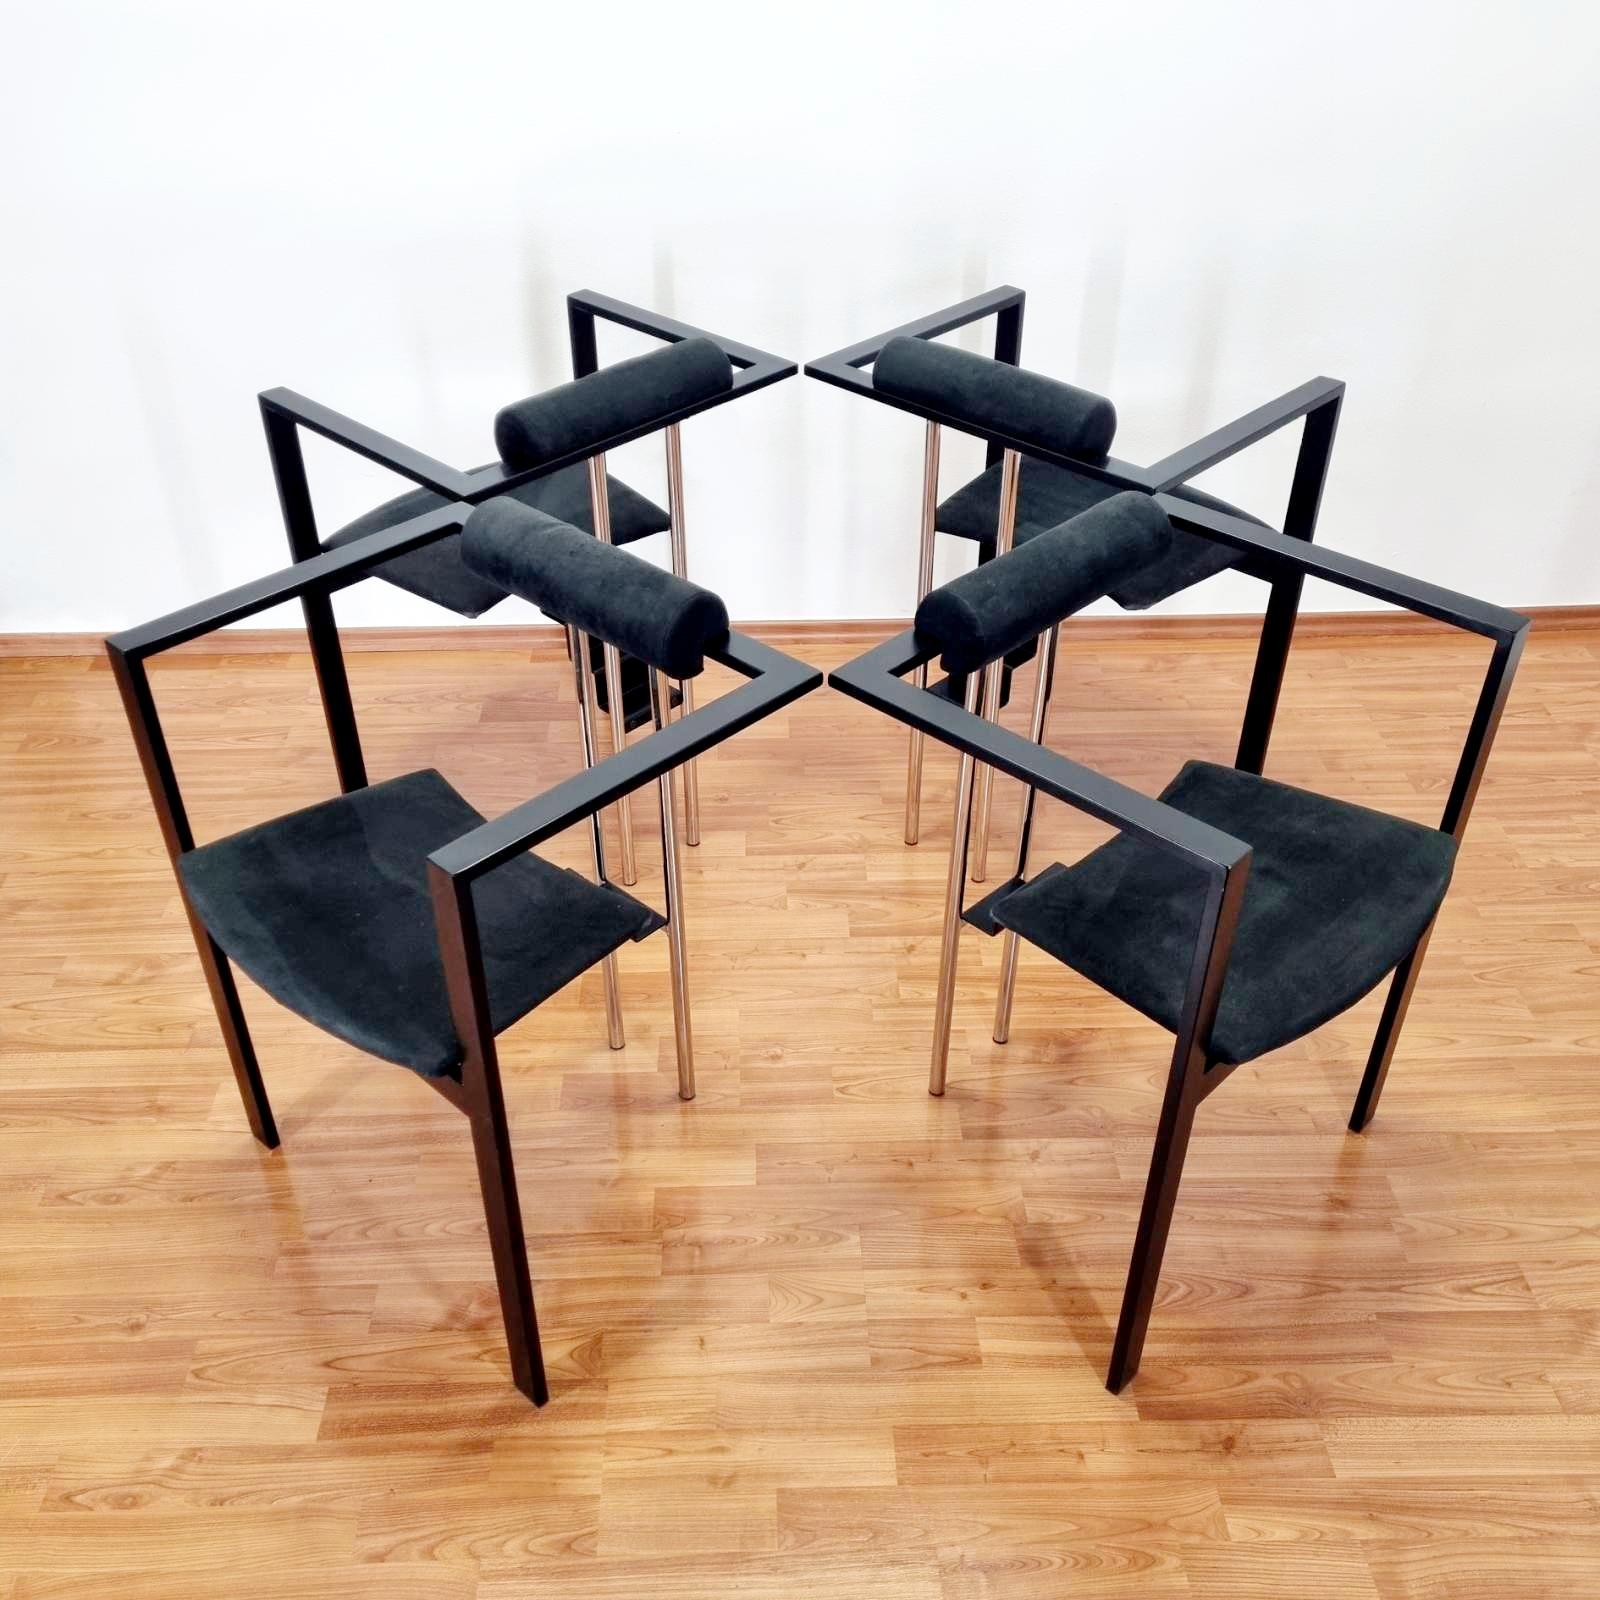 Late 20th Century Postmodern Trix Armchairs by K.F. Forster for KFF Design, Germany 80s, Set of 4 For Sale